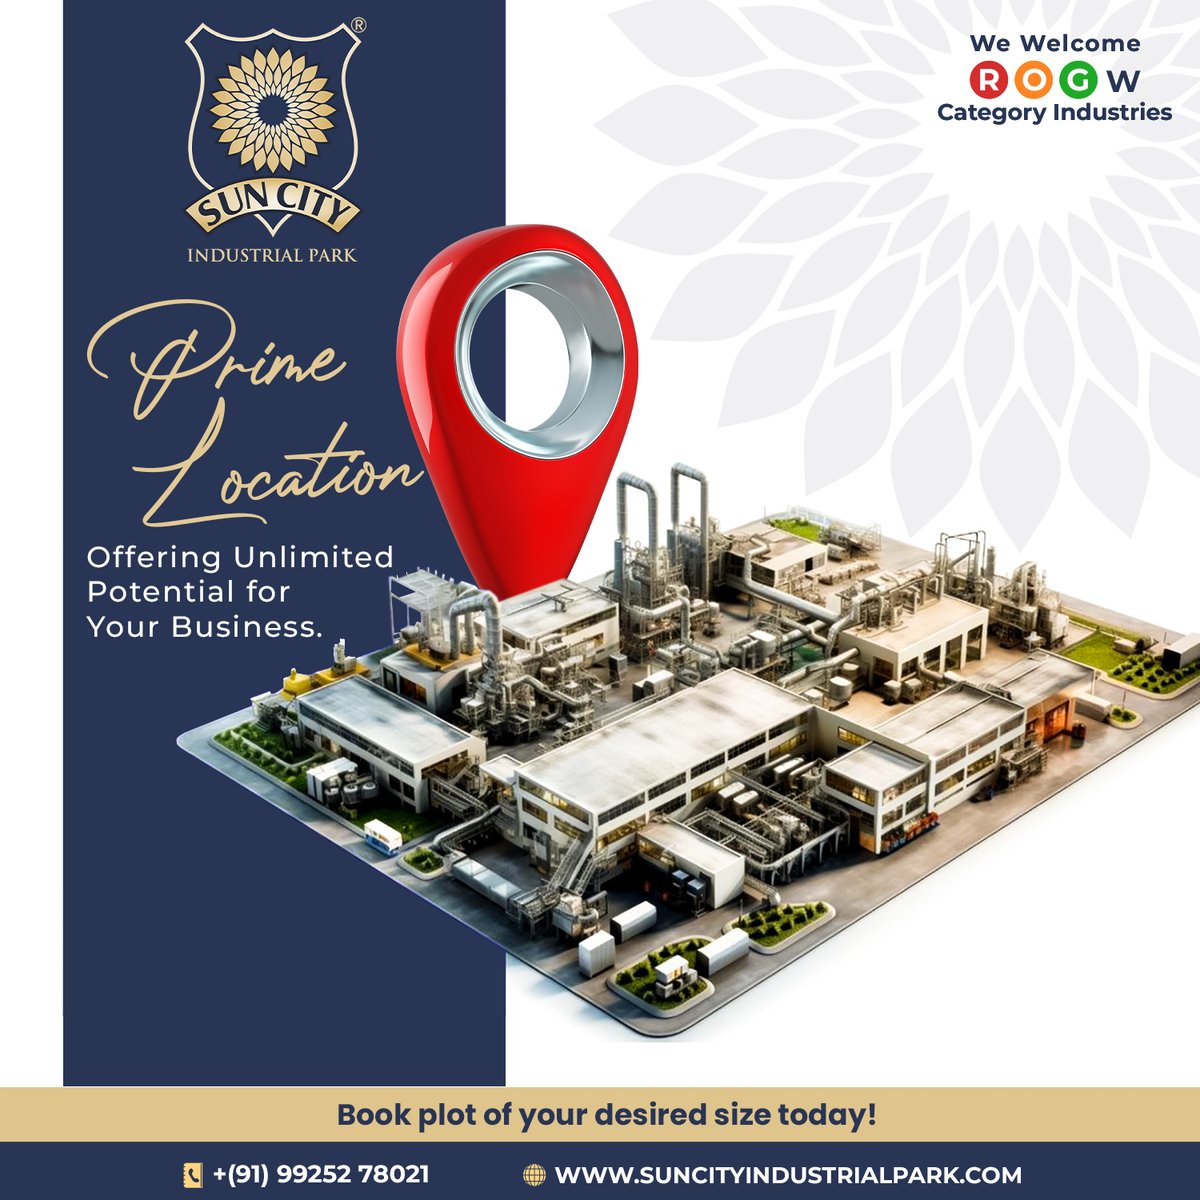 Tap into boundless possibilities for your business in this prime location. Find the ideal space for growth at Suncity Industrial Park.   Act now to secure your spot!
🌐 suncityindustrialpark.com 
📞 (+91) 8141188890 #SuncityIndustrialPark #realestate #primelocation